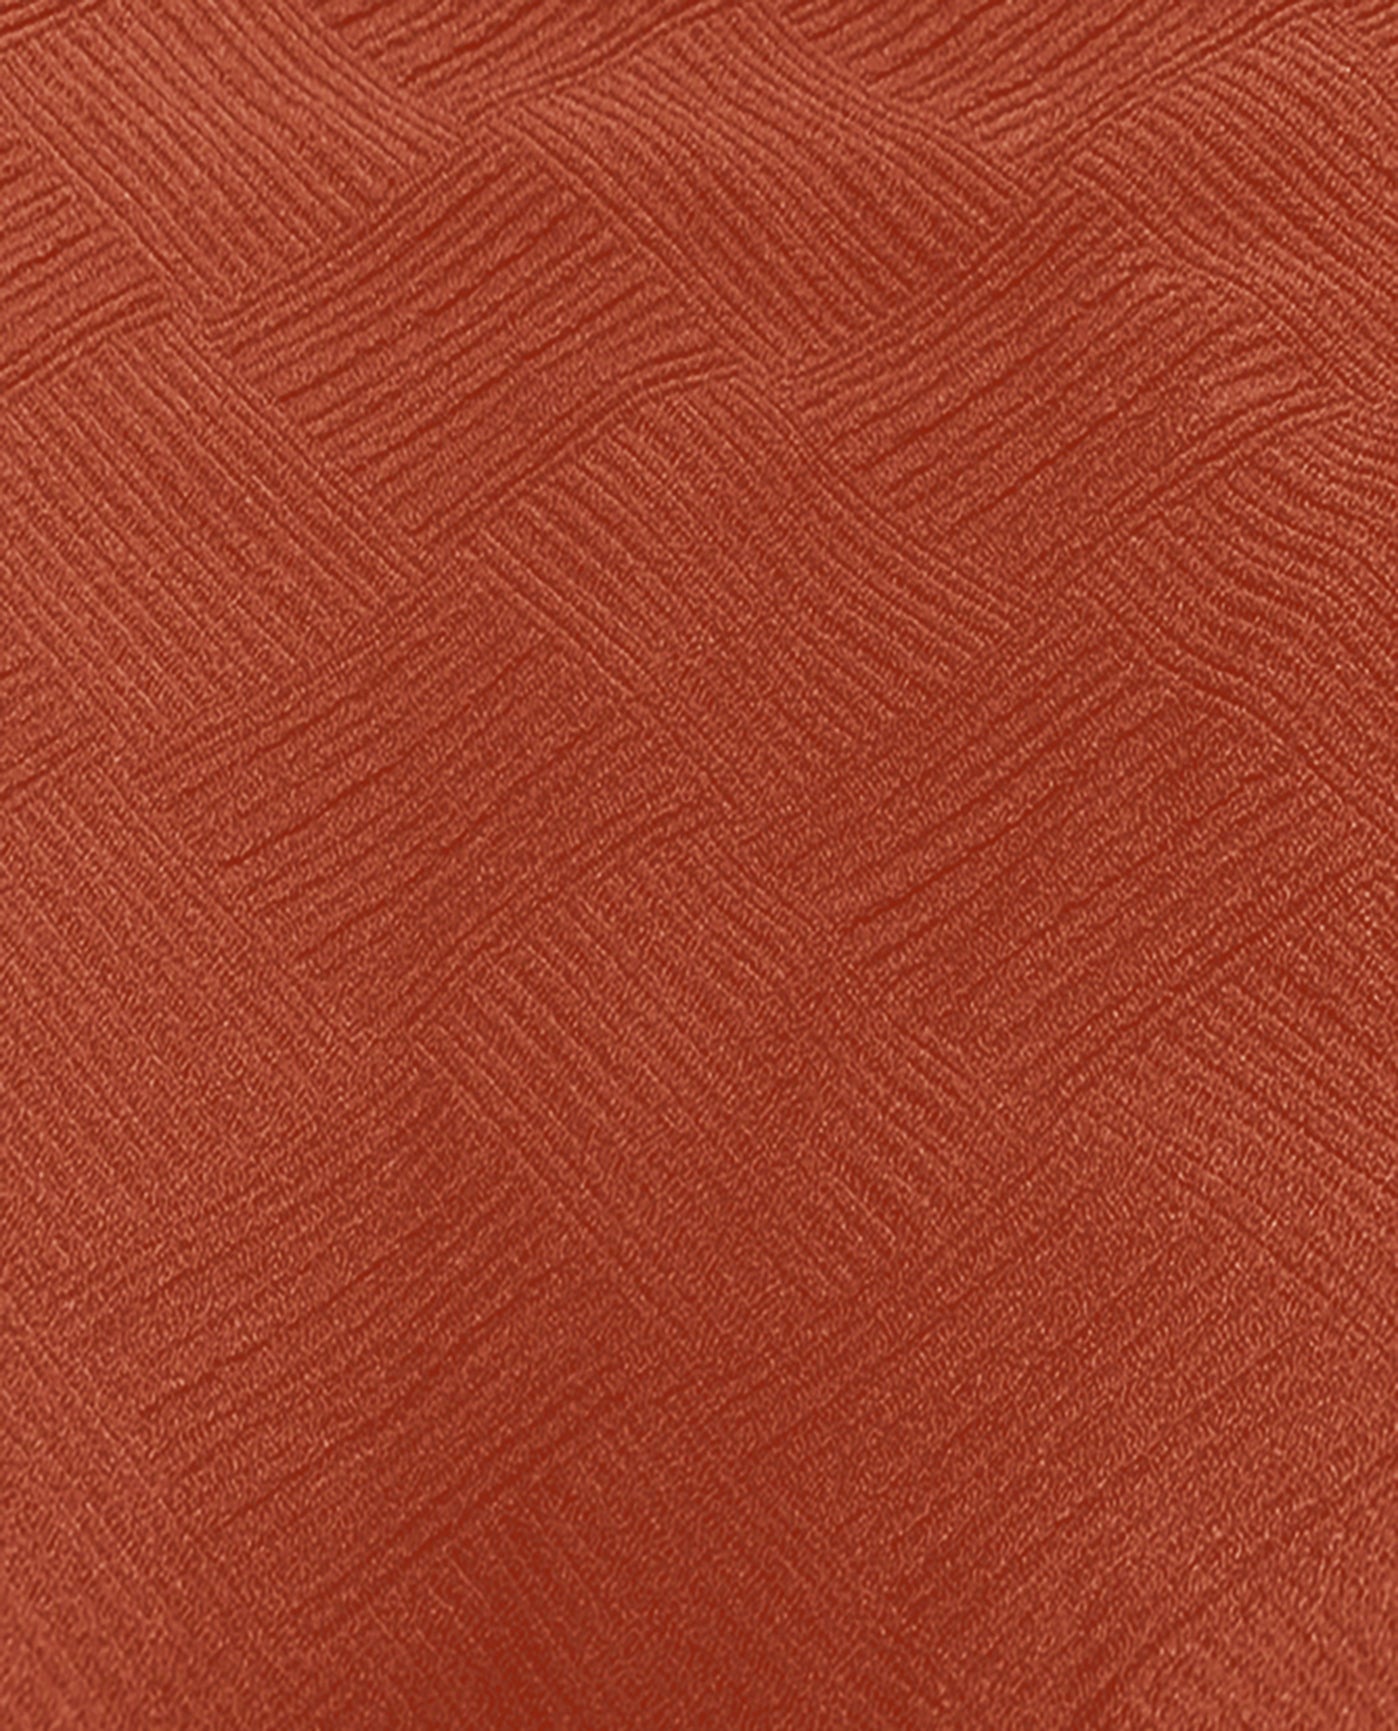 FABRIC SWATCH VIEW OF CHLORINE RESISTANT AQUAMORE SOLID SIGNATURE TEXTURED HIGH NECK ONE PIECE SWIMSUIT | 018 AQS SIGNATURE CINNAMON